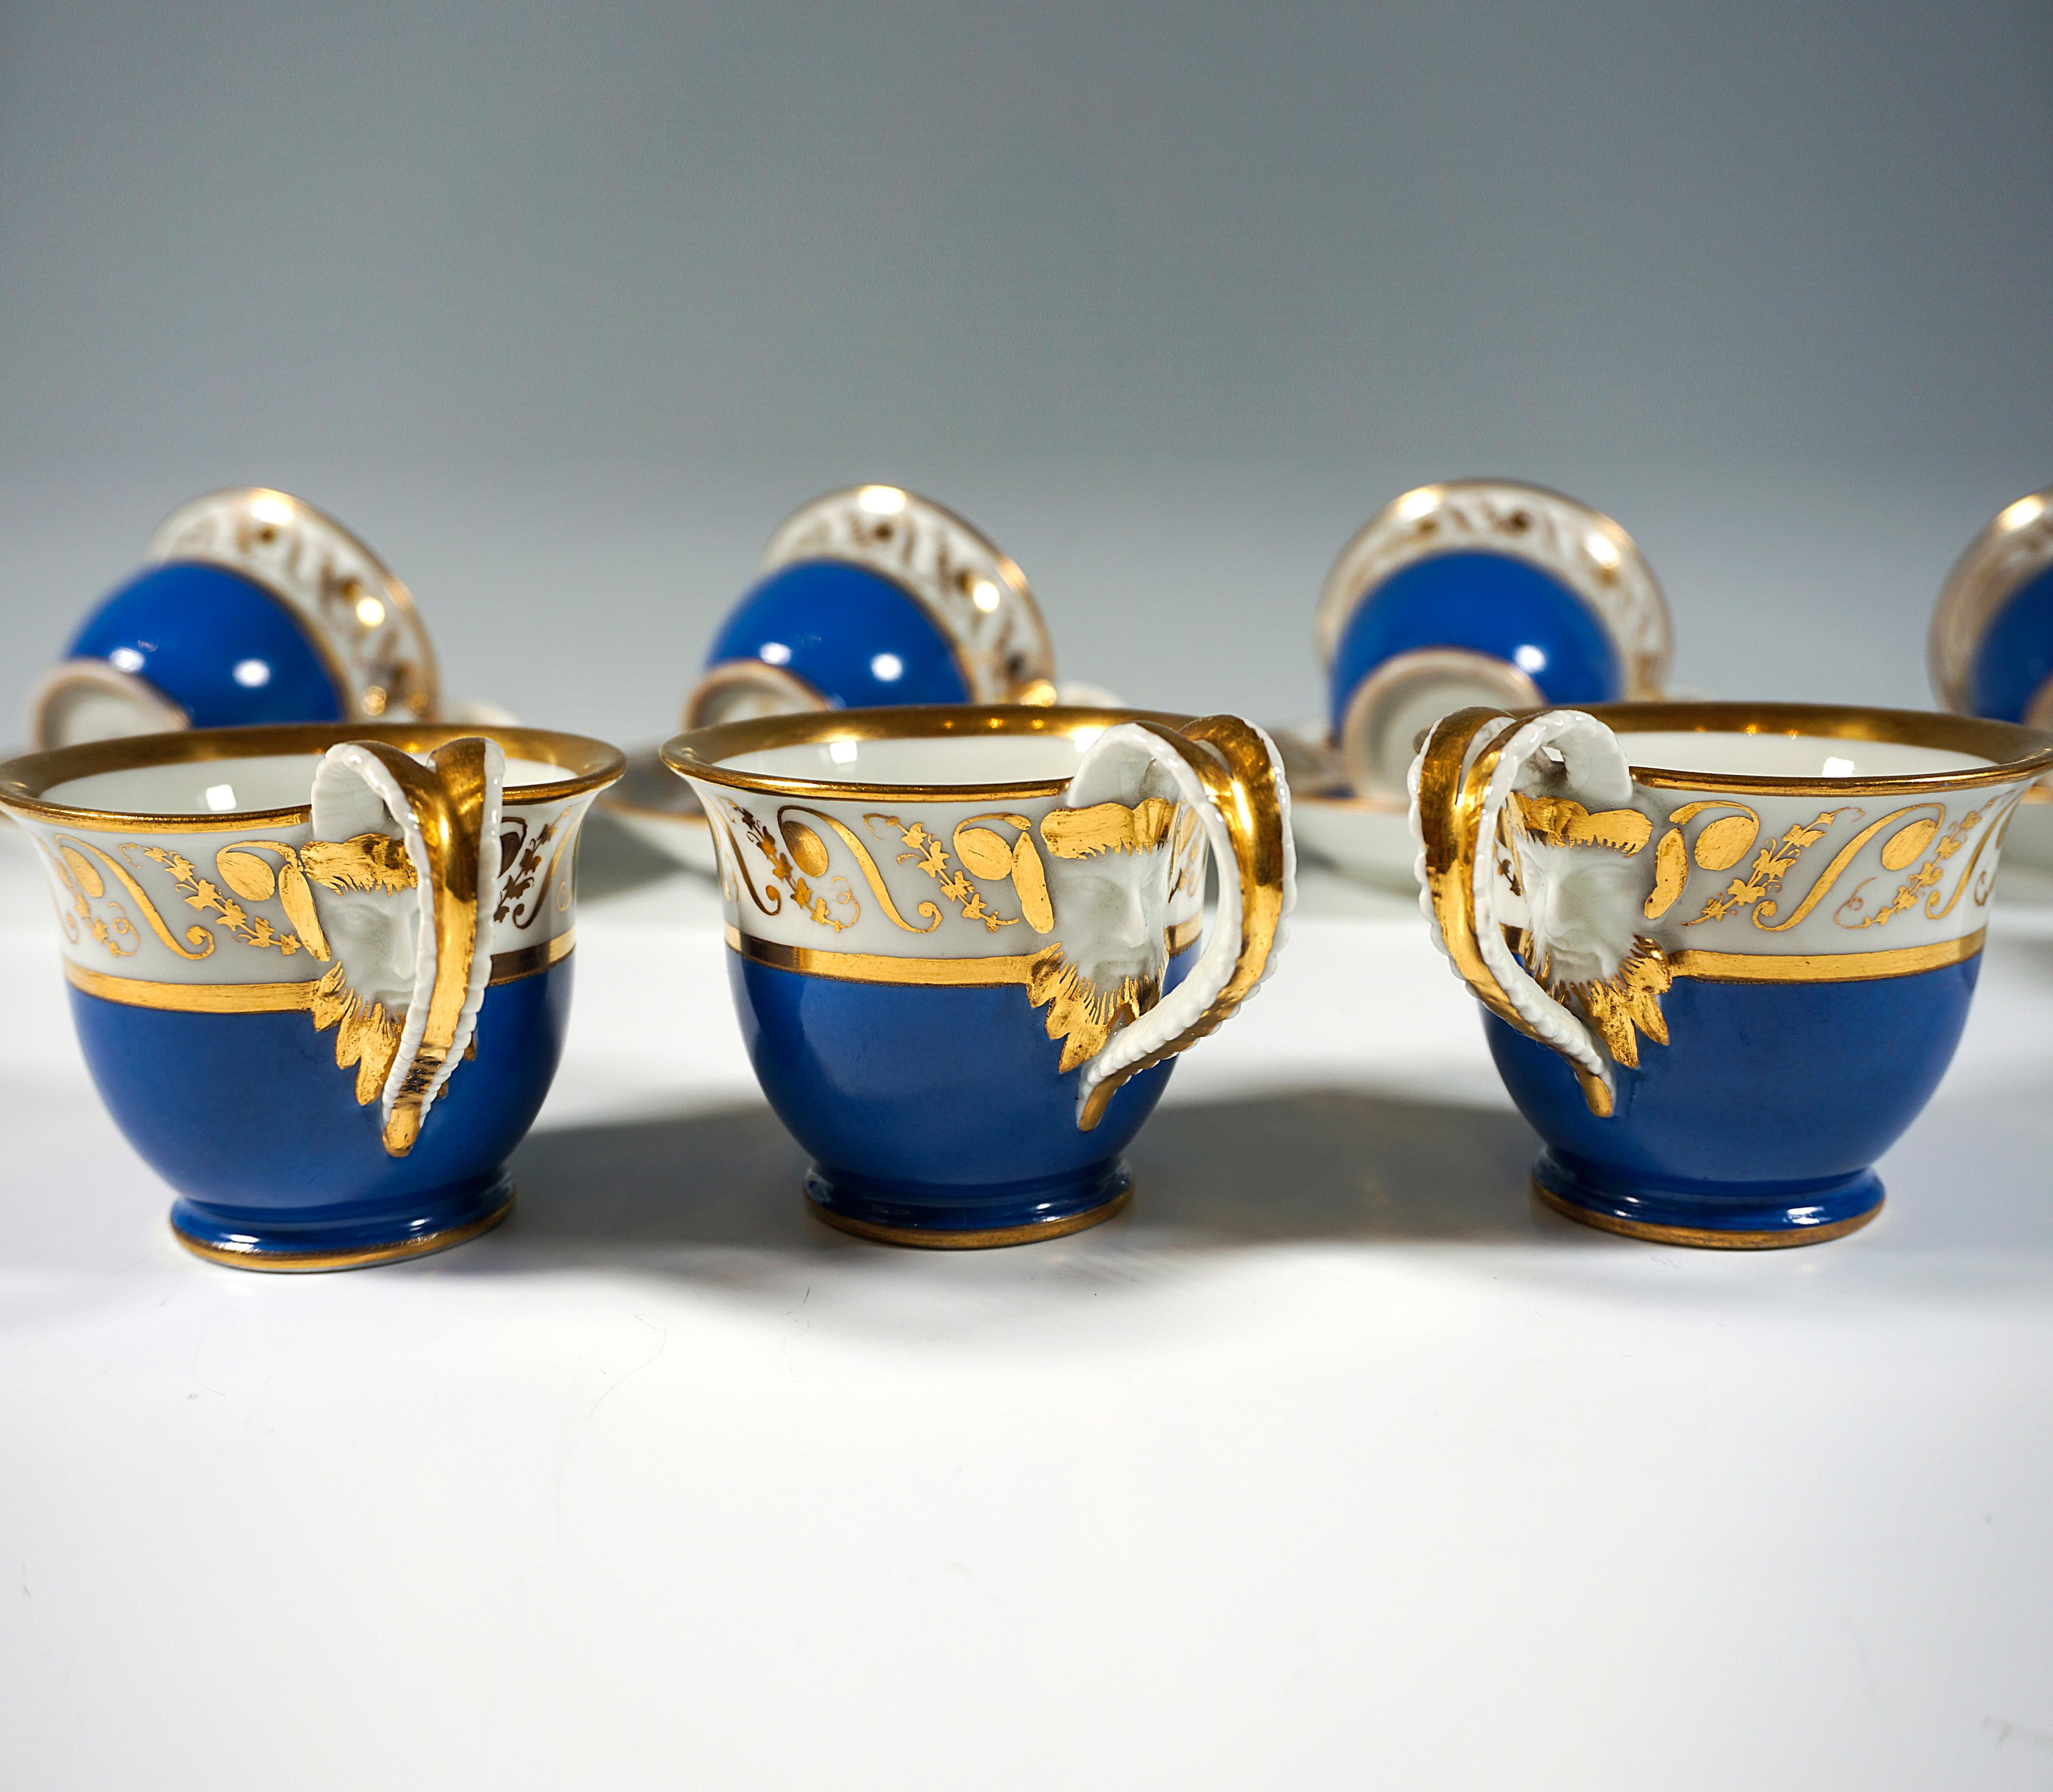 Early 19th Century Vienna Imperial Porcelain Coffee Service, 8 People, Prussian Blue & Gold, 1825 For Sale